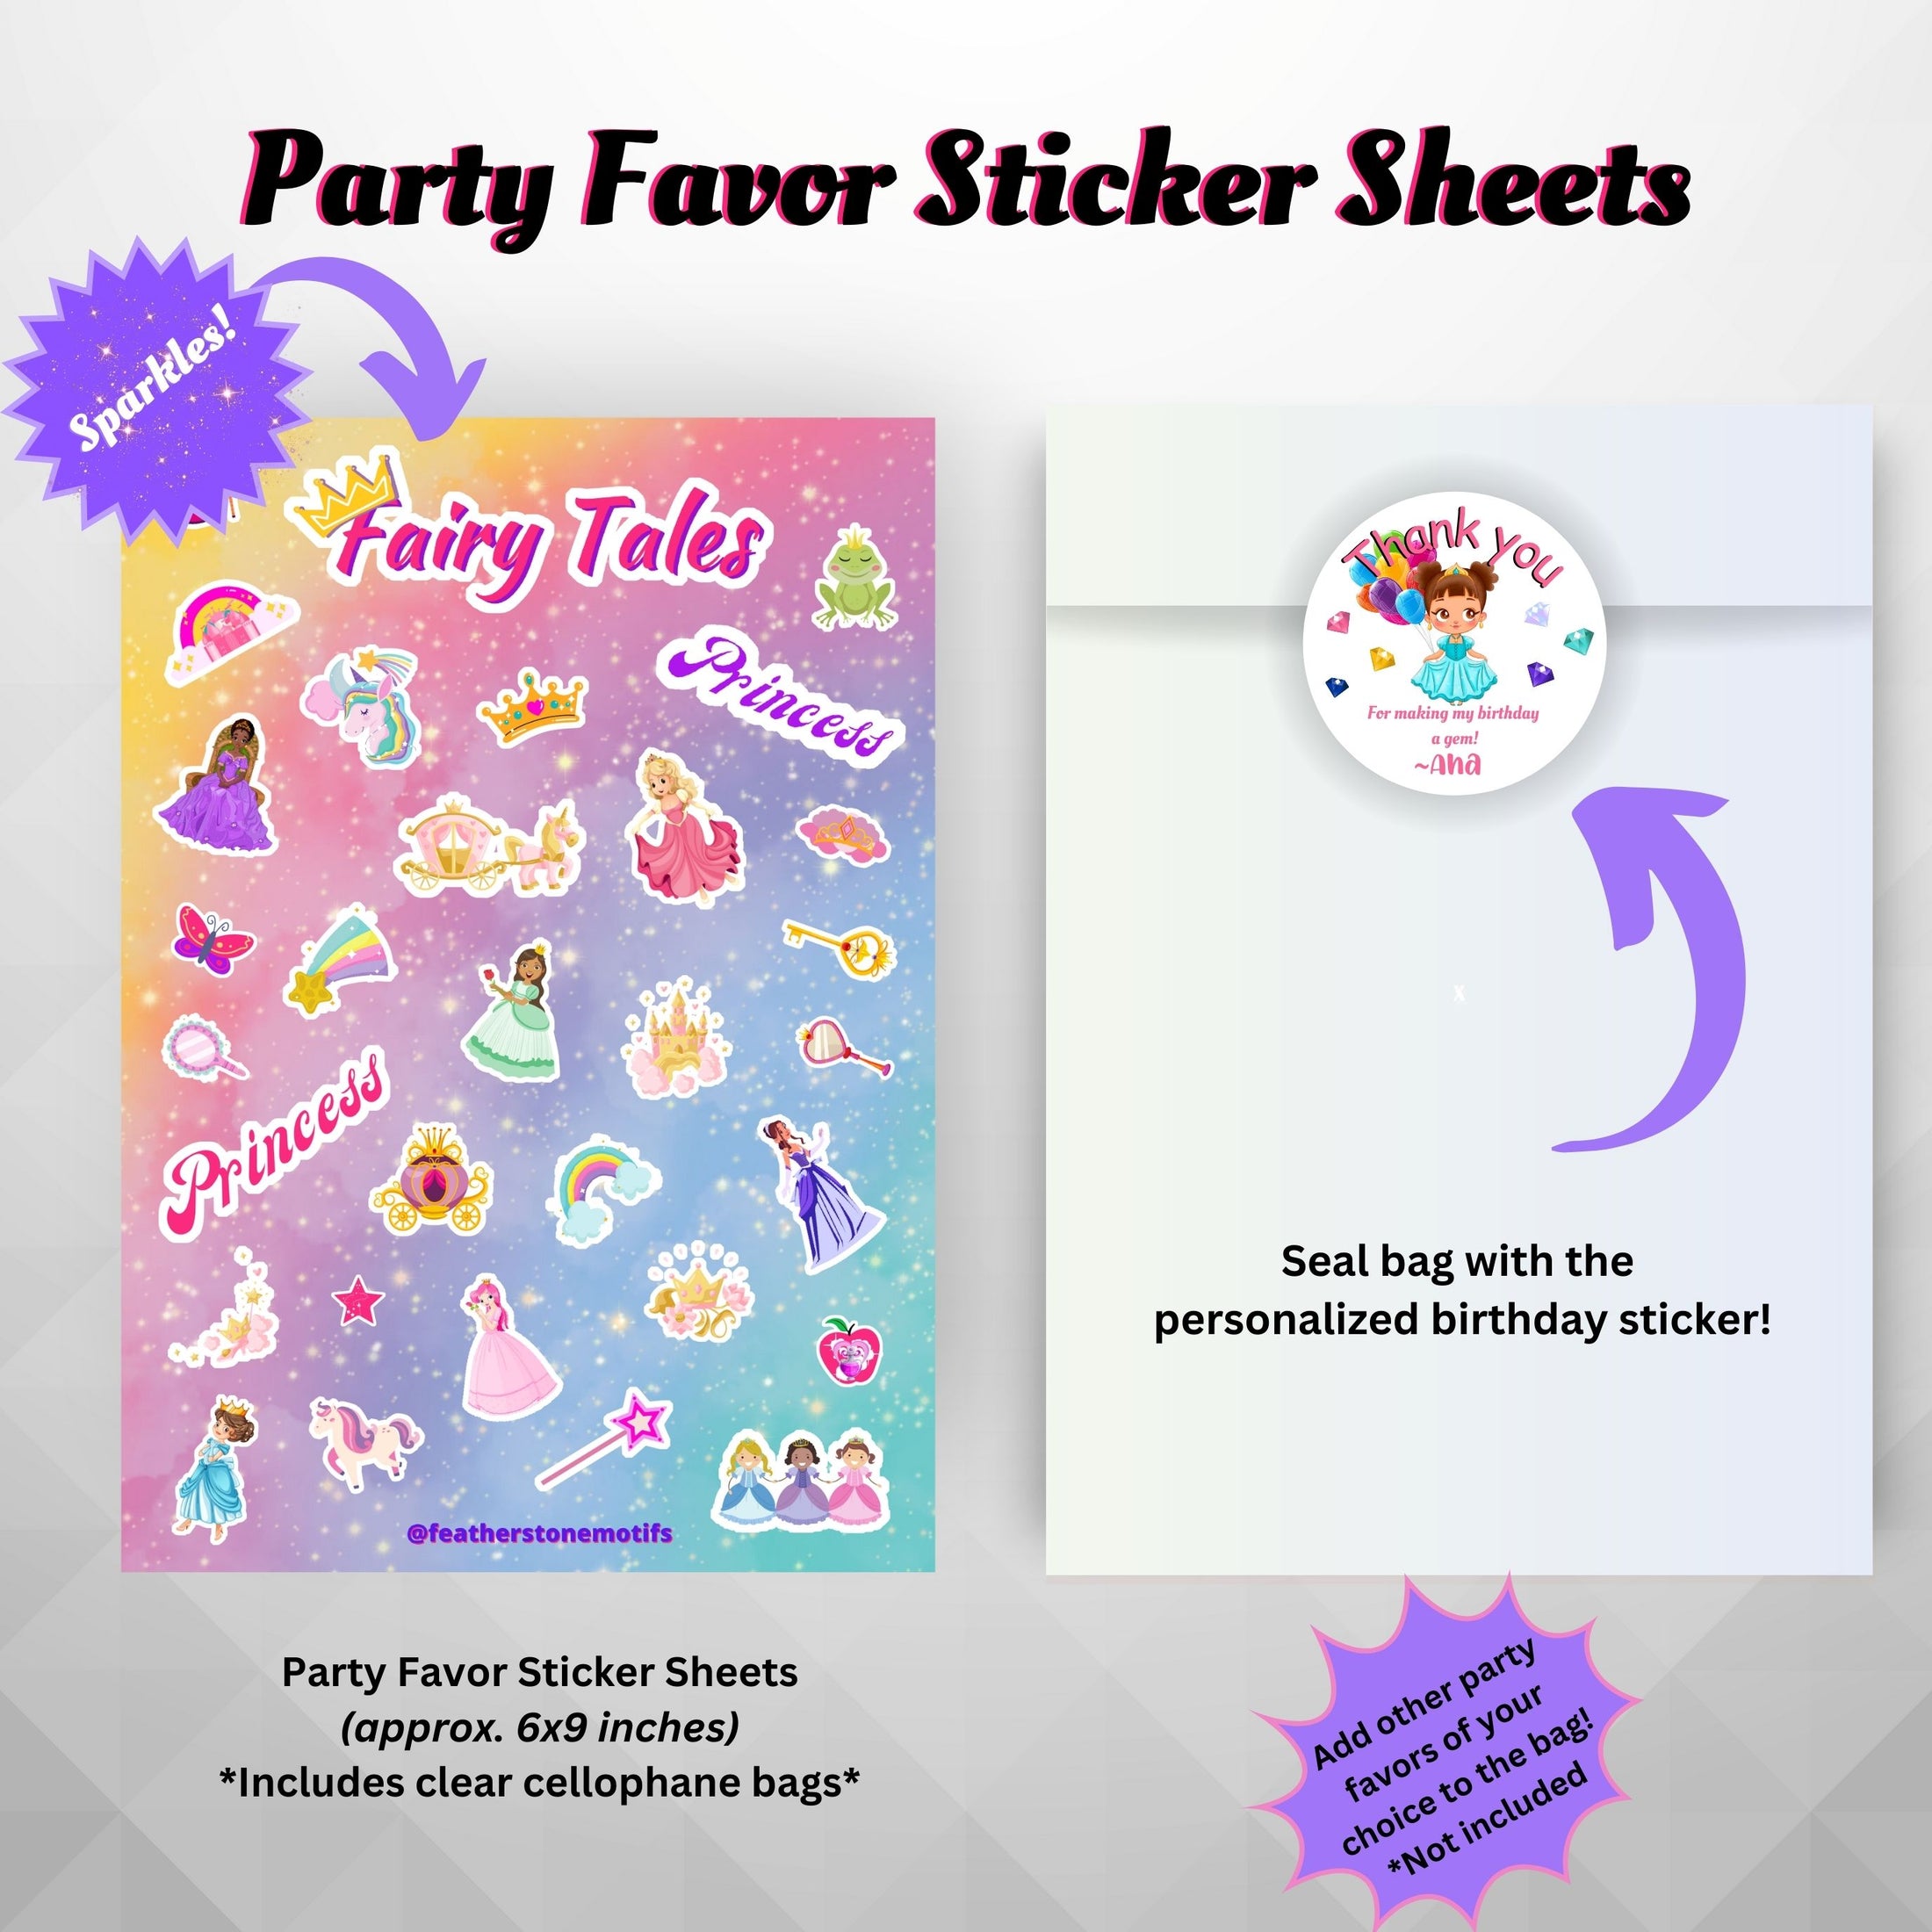 This image shows the Fairy Tales sticker sheet included as a party favor, the cellophane bag, and the personalized paper thank you sticker.